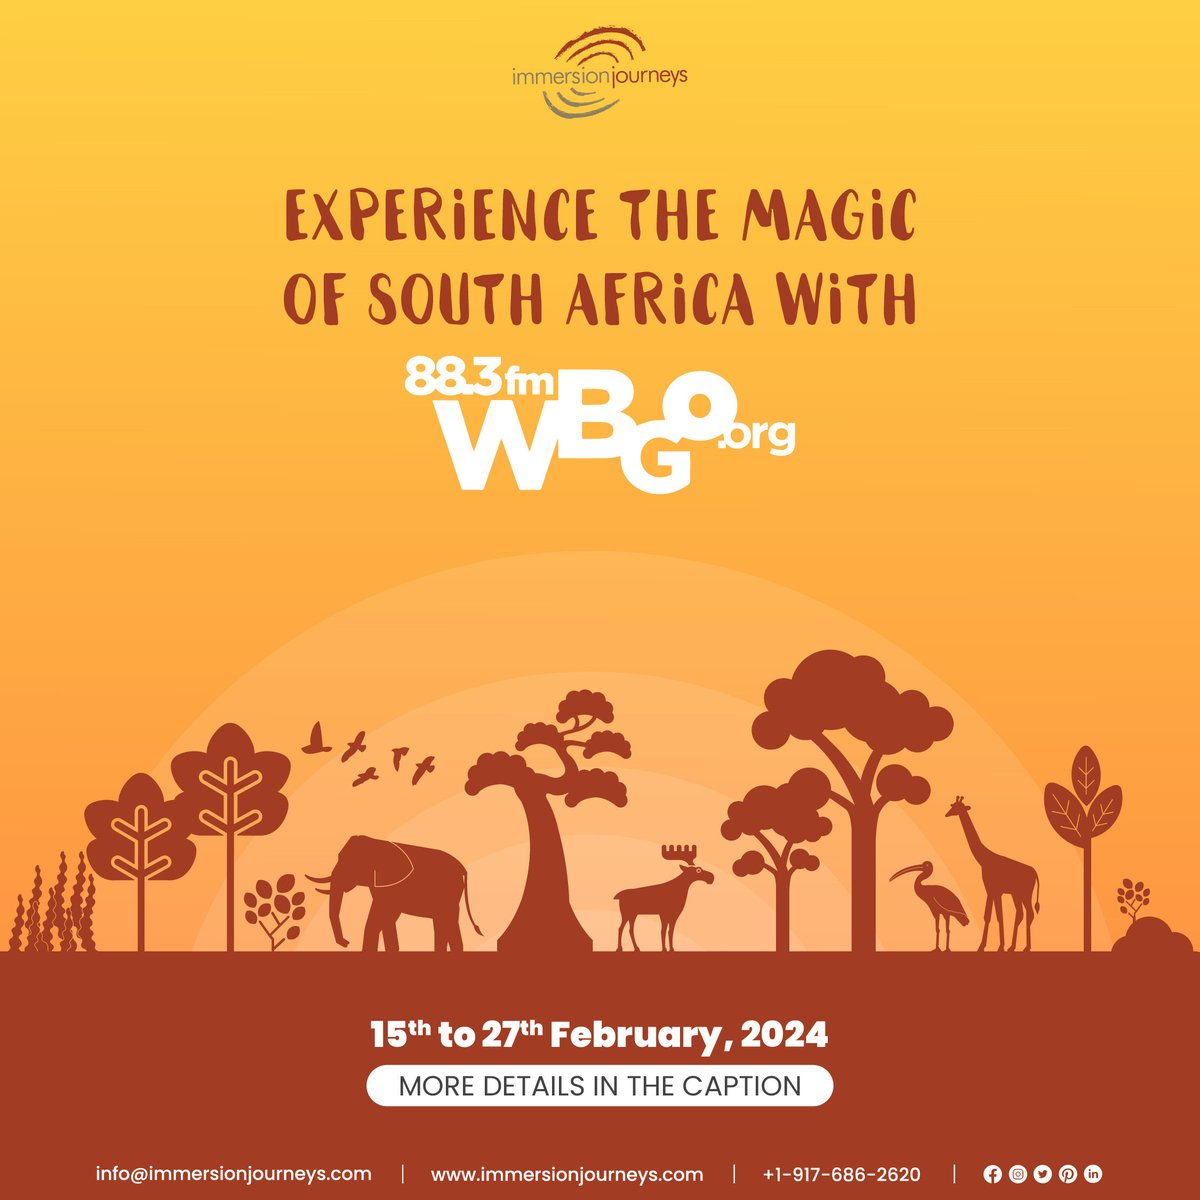 Exploring the ‘Rainbow Nation’ one adventure at a time! Escape into the glorious country of South Africa and unlock all its wonders with @WBGO !

For more information, go to immersionjourneys.com/wbgosouthafric…

#ImmersionJourneys #TravelEasy #SouthAfricaTravels #ToursInSouthAfrica #WBGO